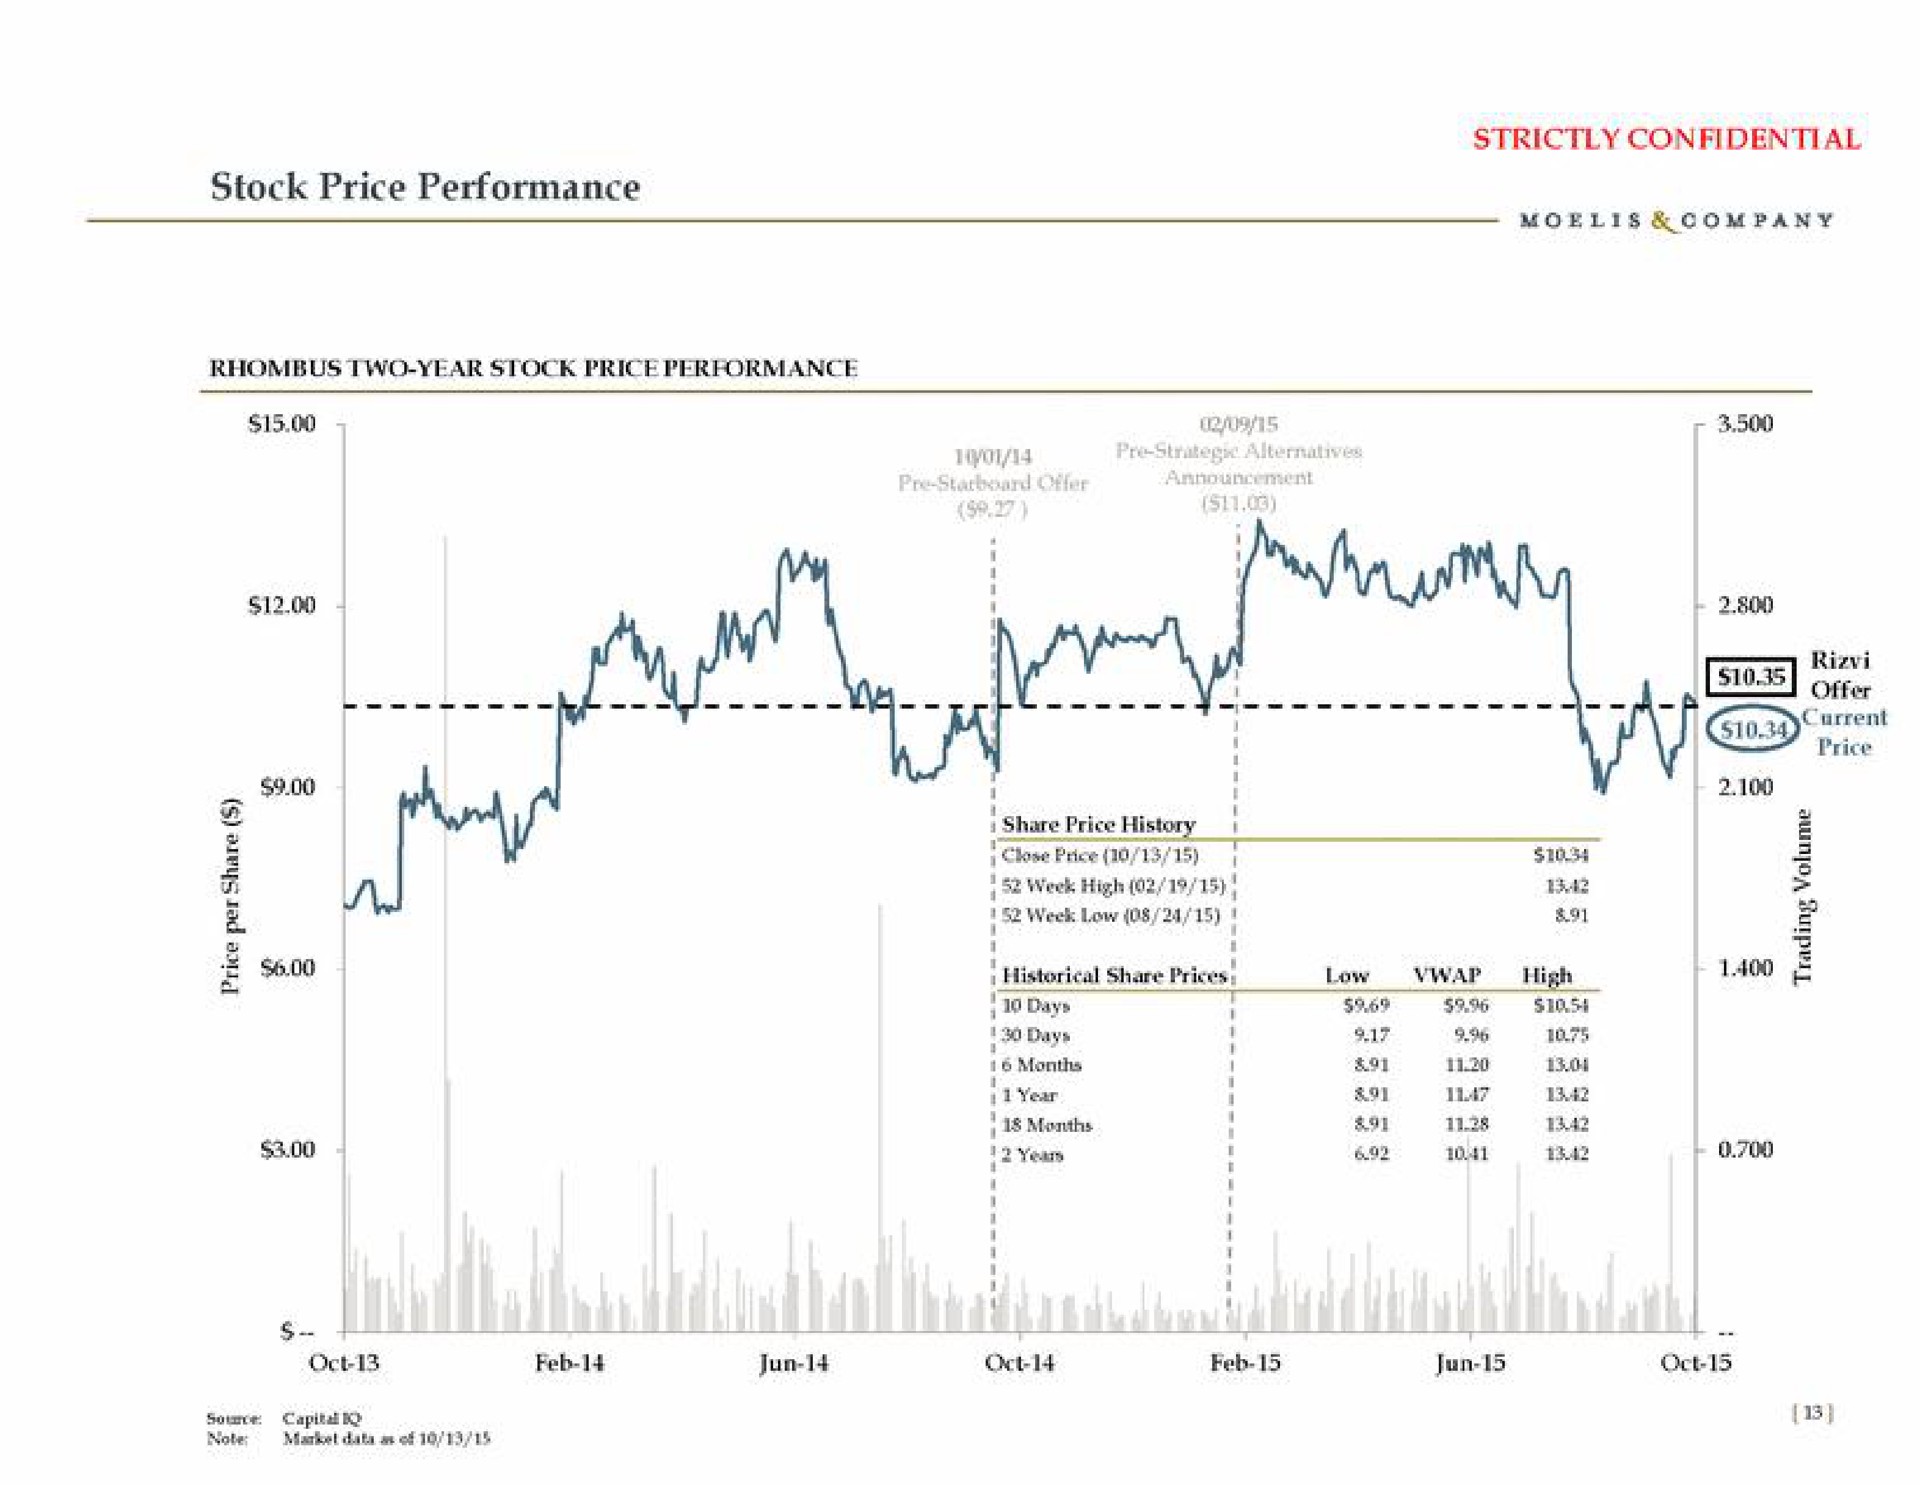 stock price performance a a share price history glove price week high i an | Moelis & Company